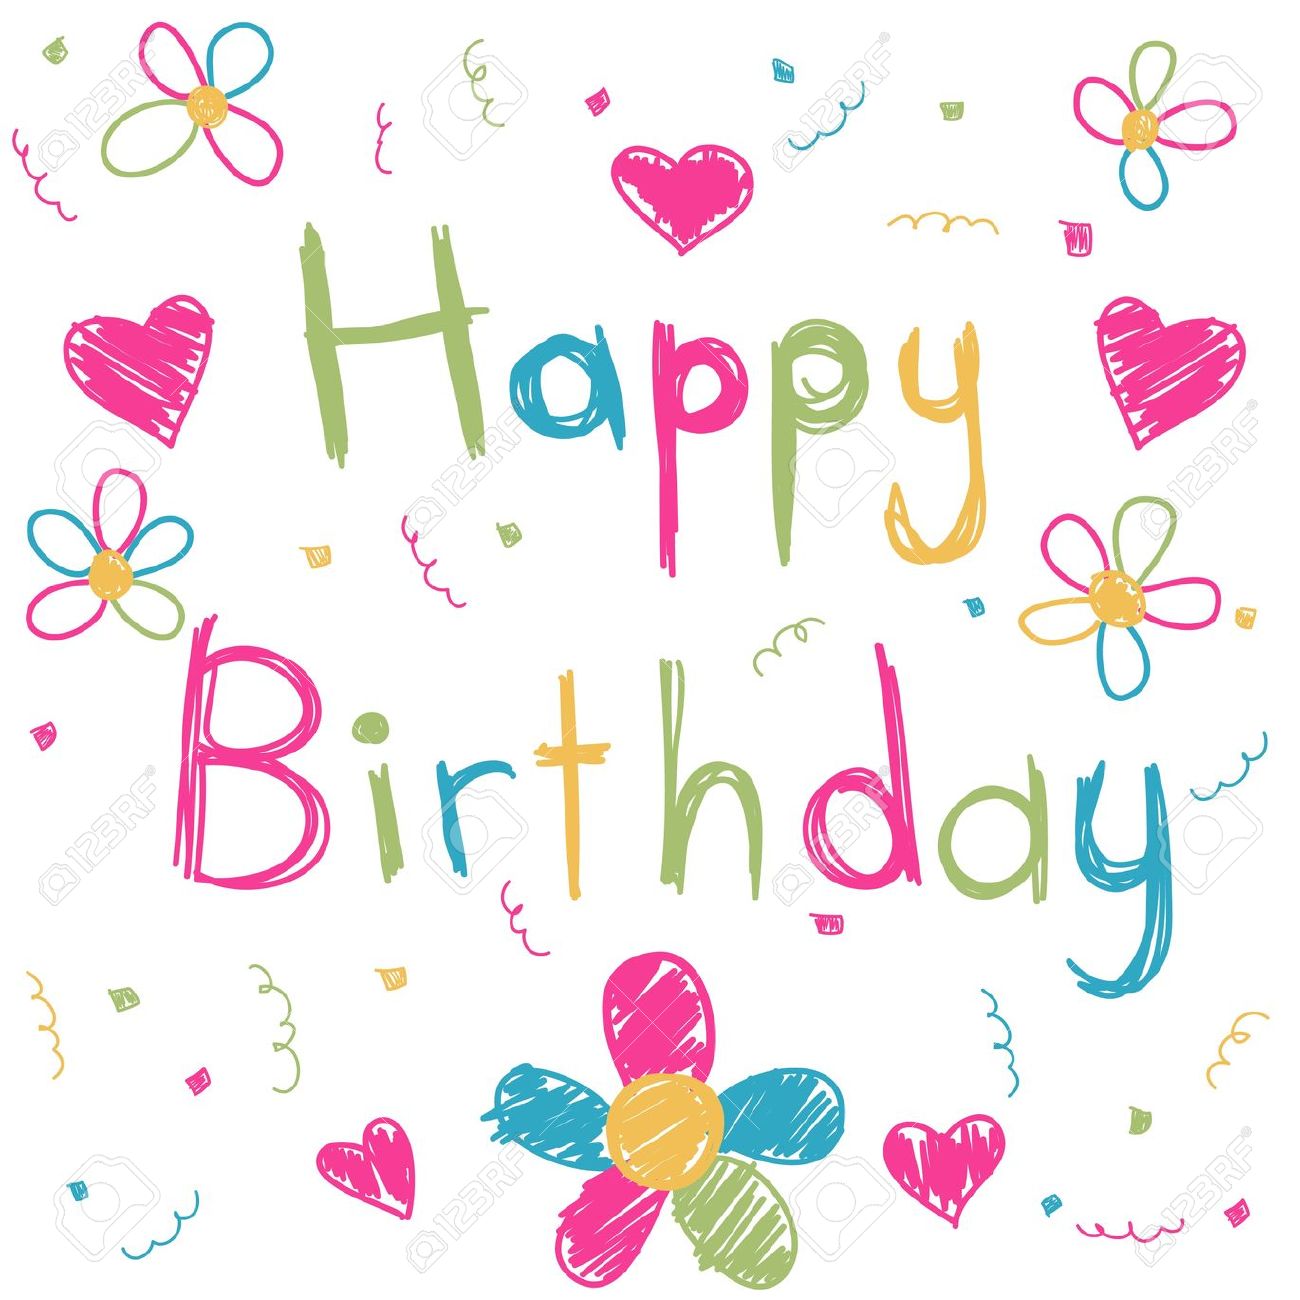 Happy Birthday Girl - Birthday wishes for girls, images and messages